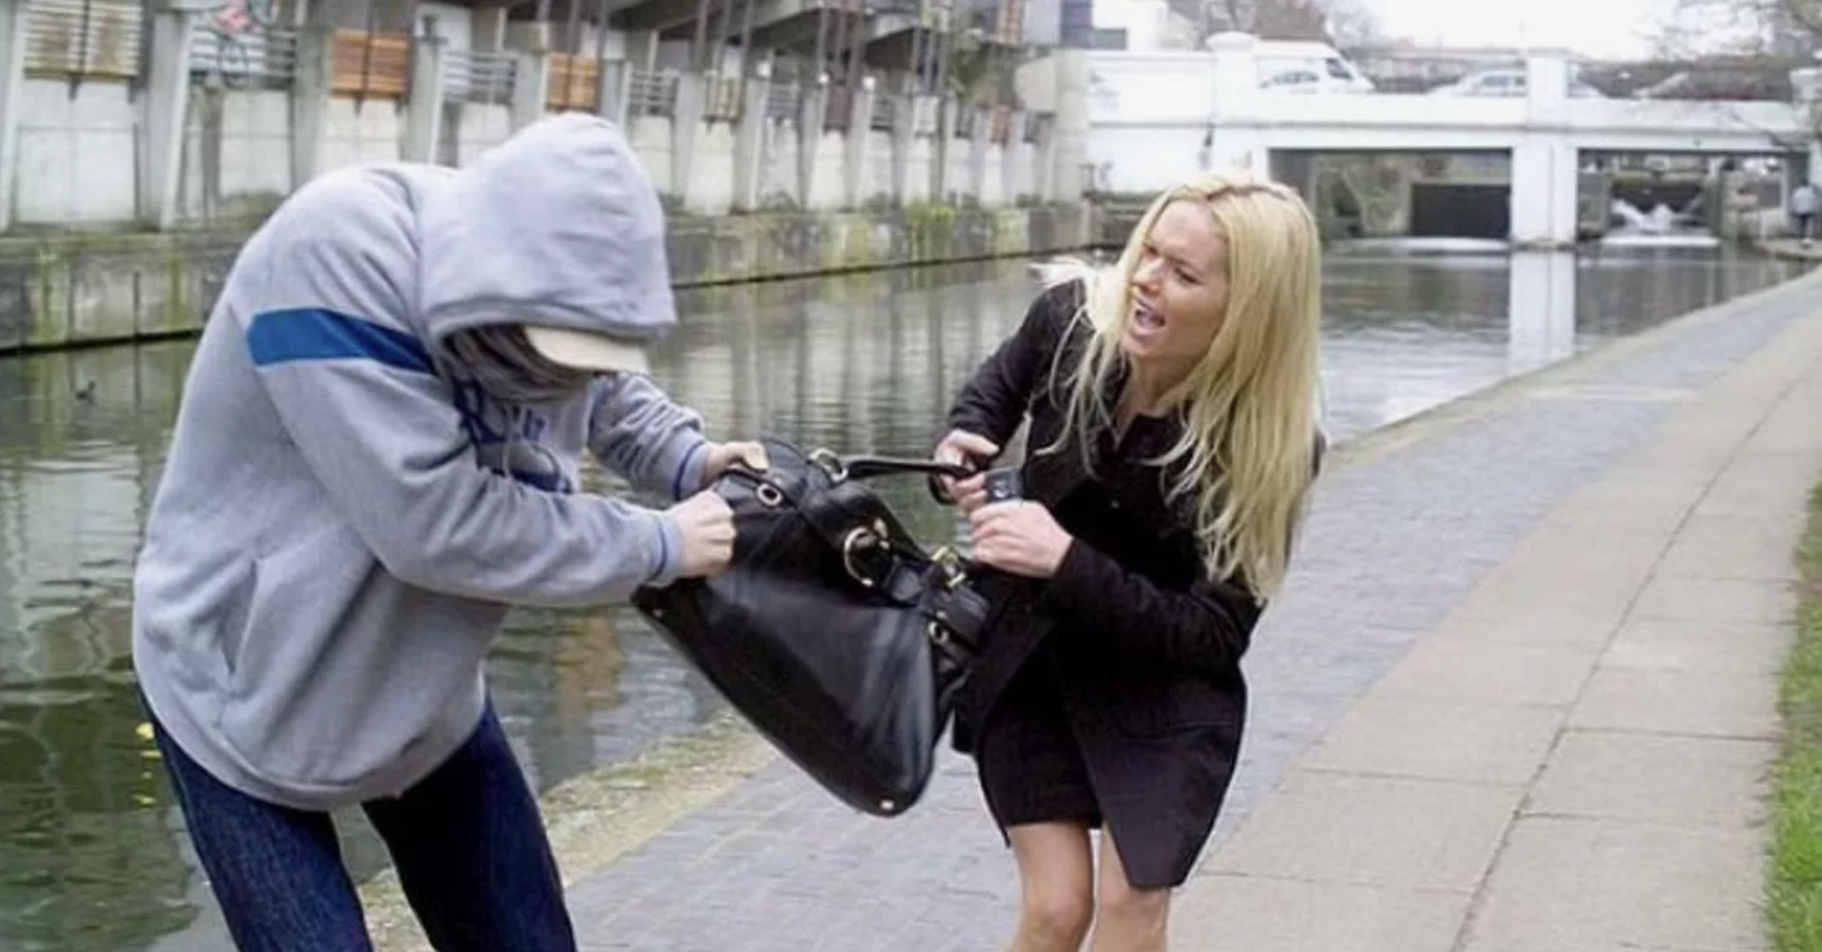 Street thief trying to steal a woman's purse | Source: Shutterstock